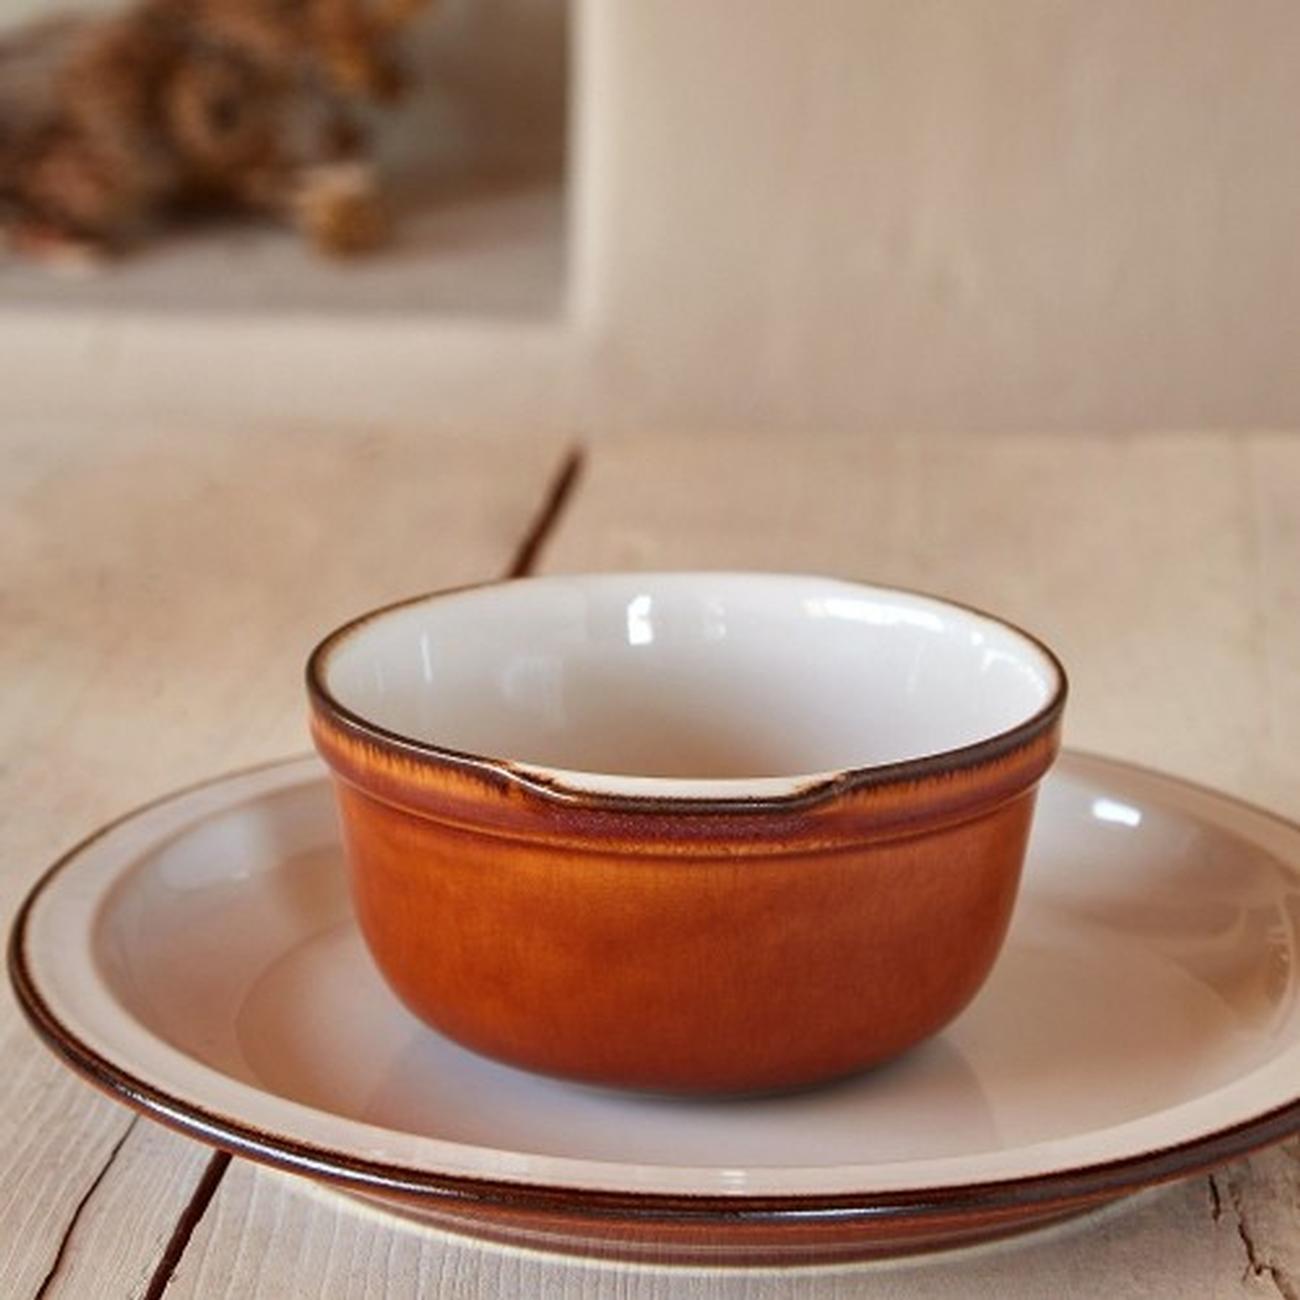 casafina-poterie-soup-and-cereal-bowl-13cm-cream-caramel - Poterie Soup & Cereal Bowl 13cm